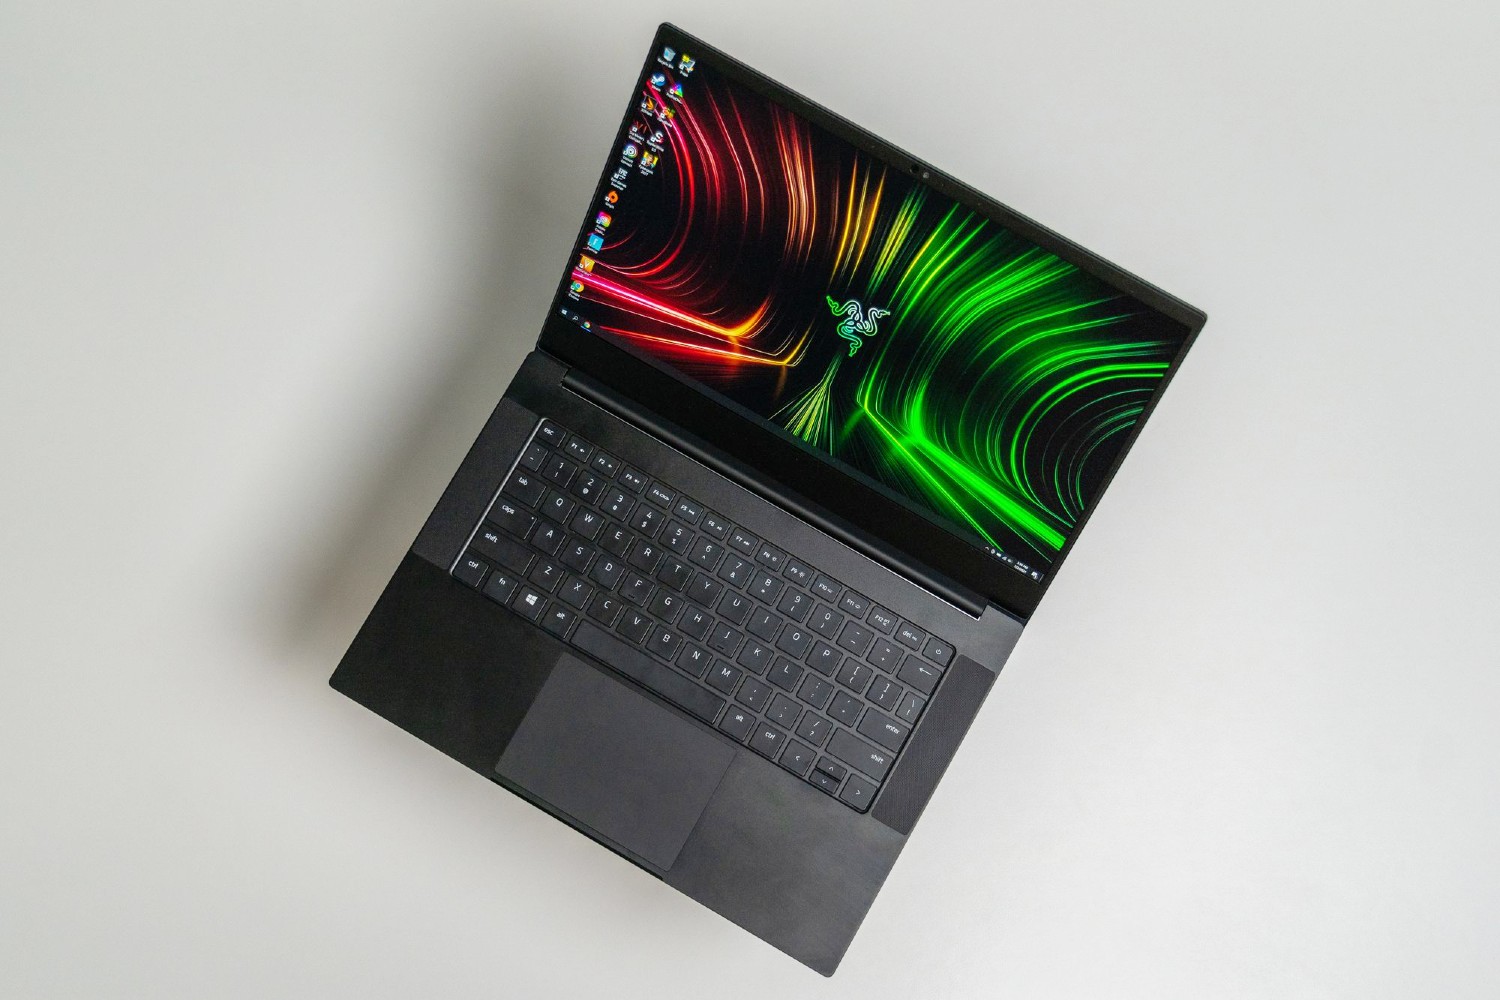 Razer Blade 14 Review: The Gaming Laptop Usurper Has Arrived